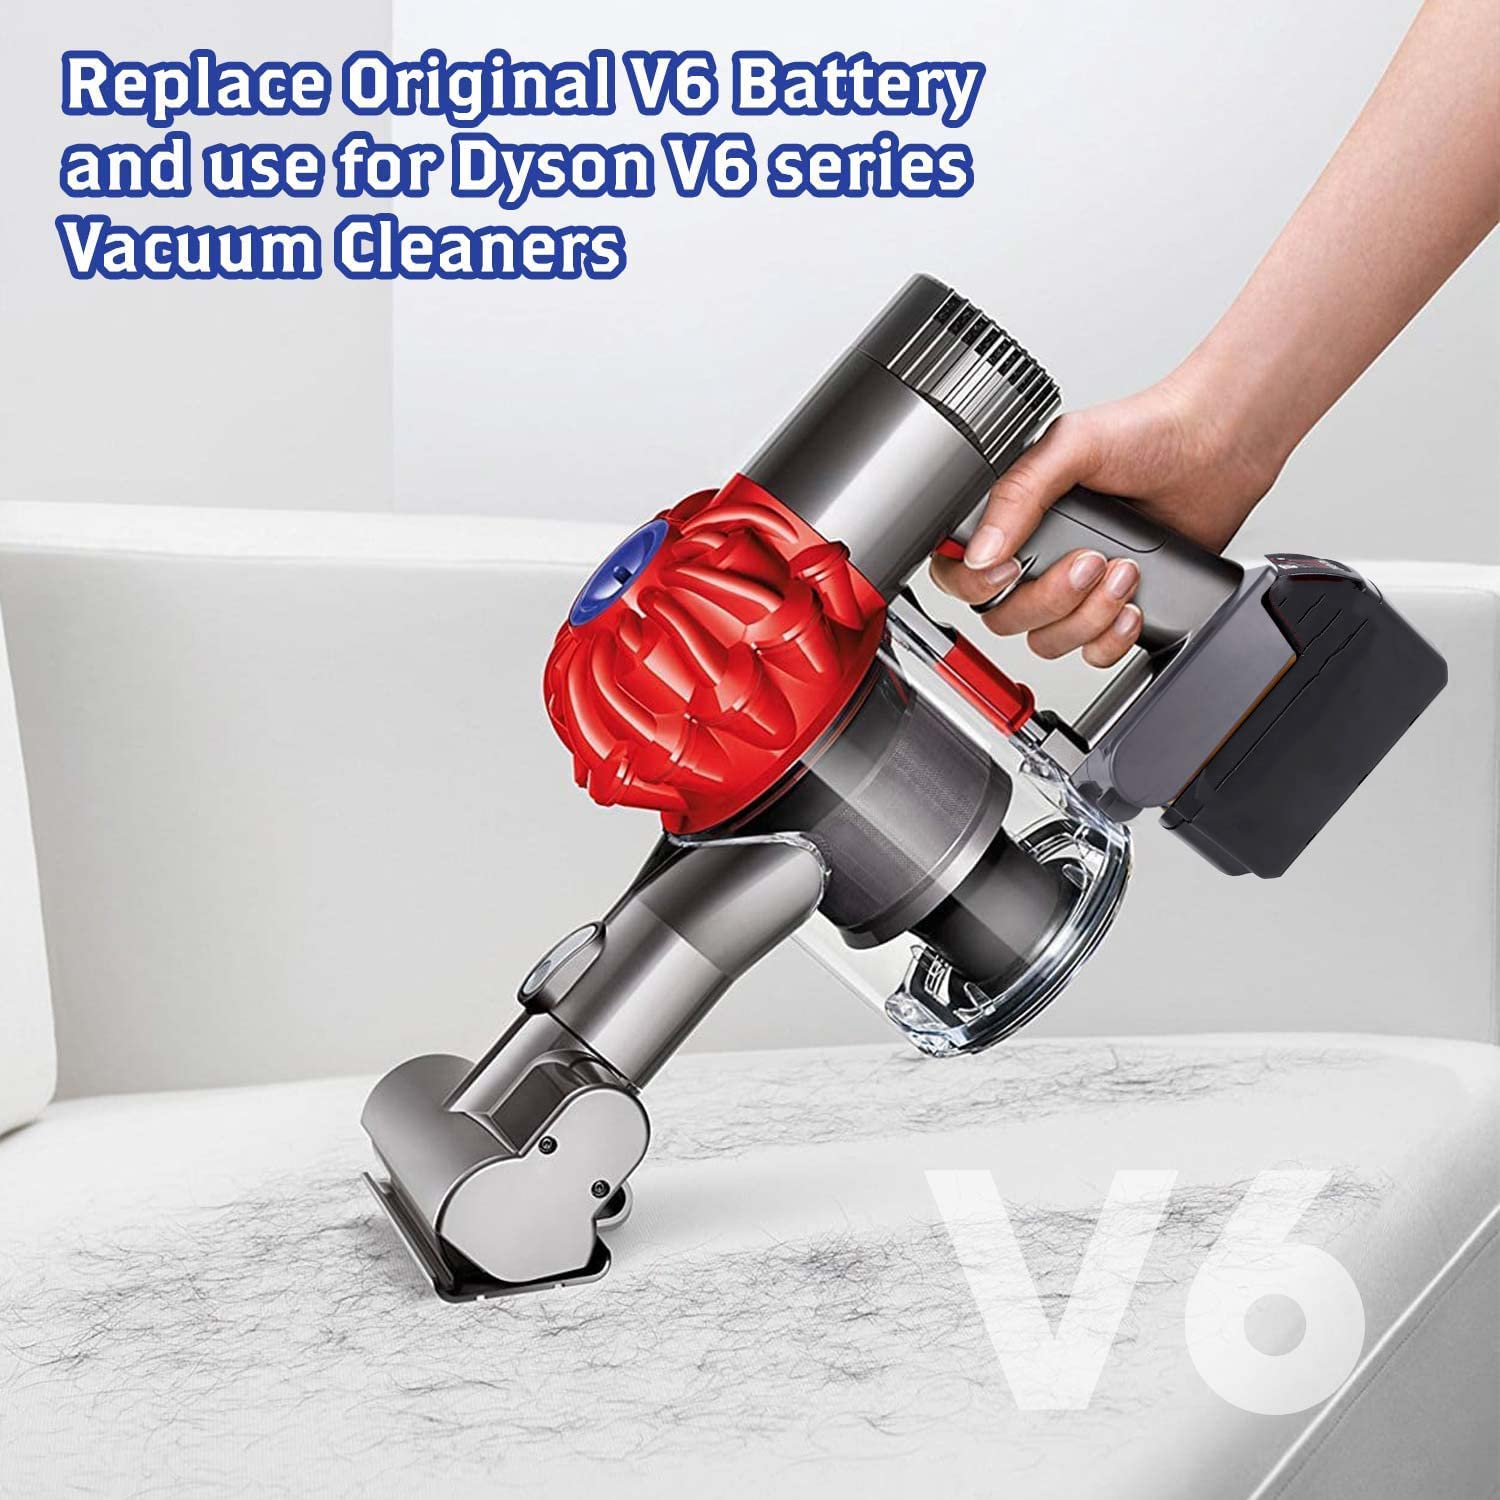 For Dyson V8 Battery Adapter, V8 Converter for Makita 18V Lithium Battery  to for Dyson V8 Battery, Work with Dyson V8 Animal Absolute Cordless Stick